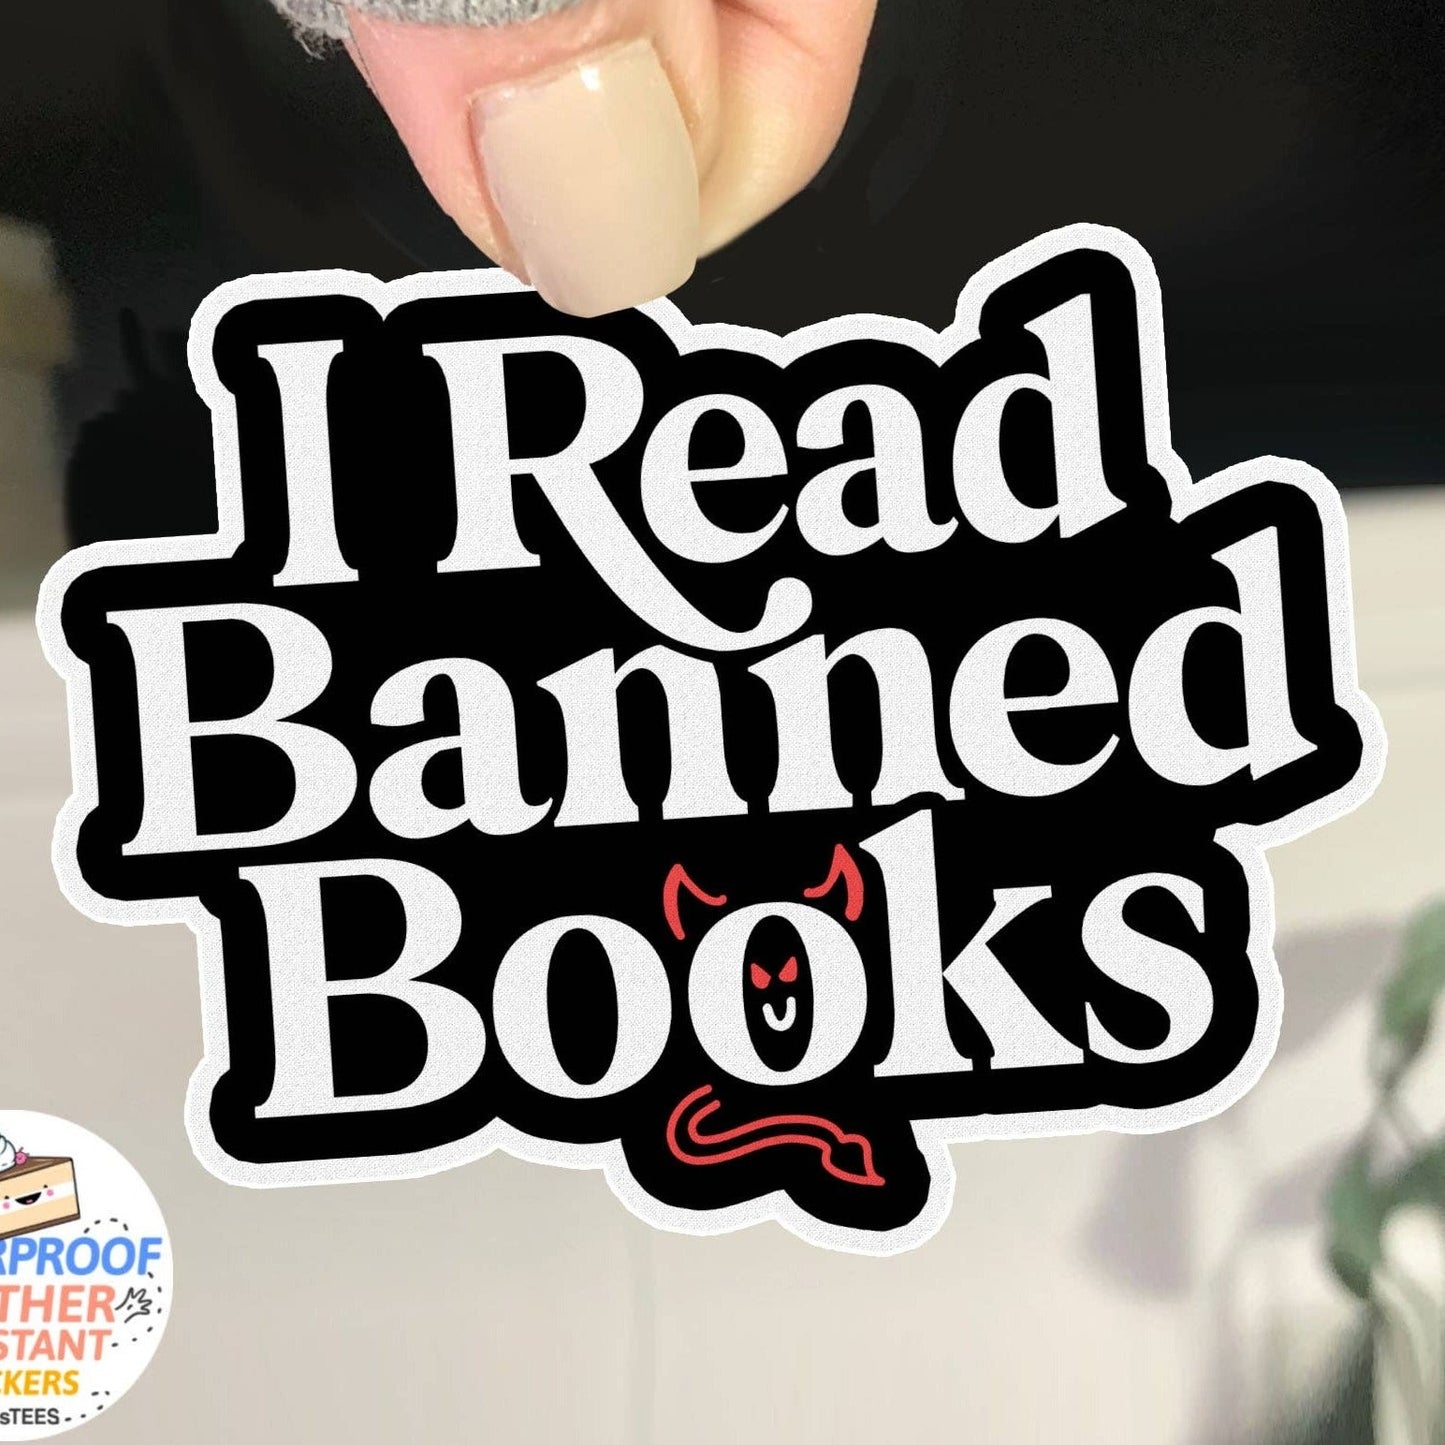 Boots Tees - I Read Banned Books Sticker, 3" Waterproof Bookstore Decal